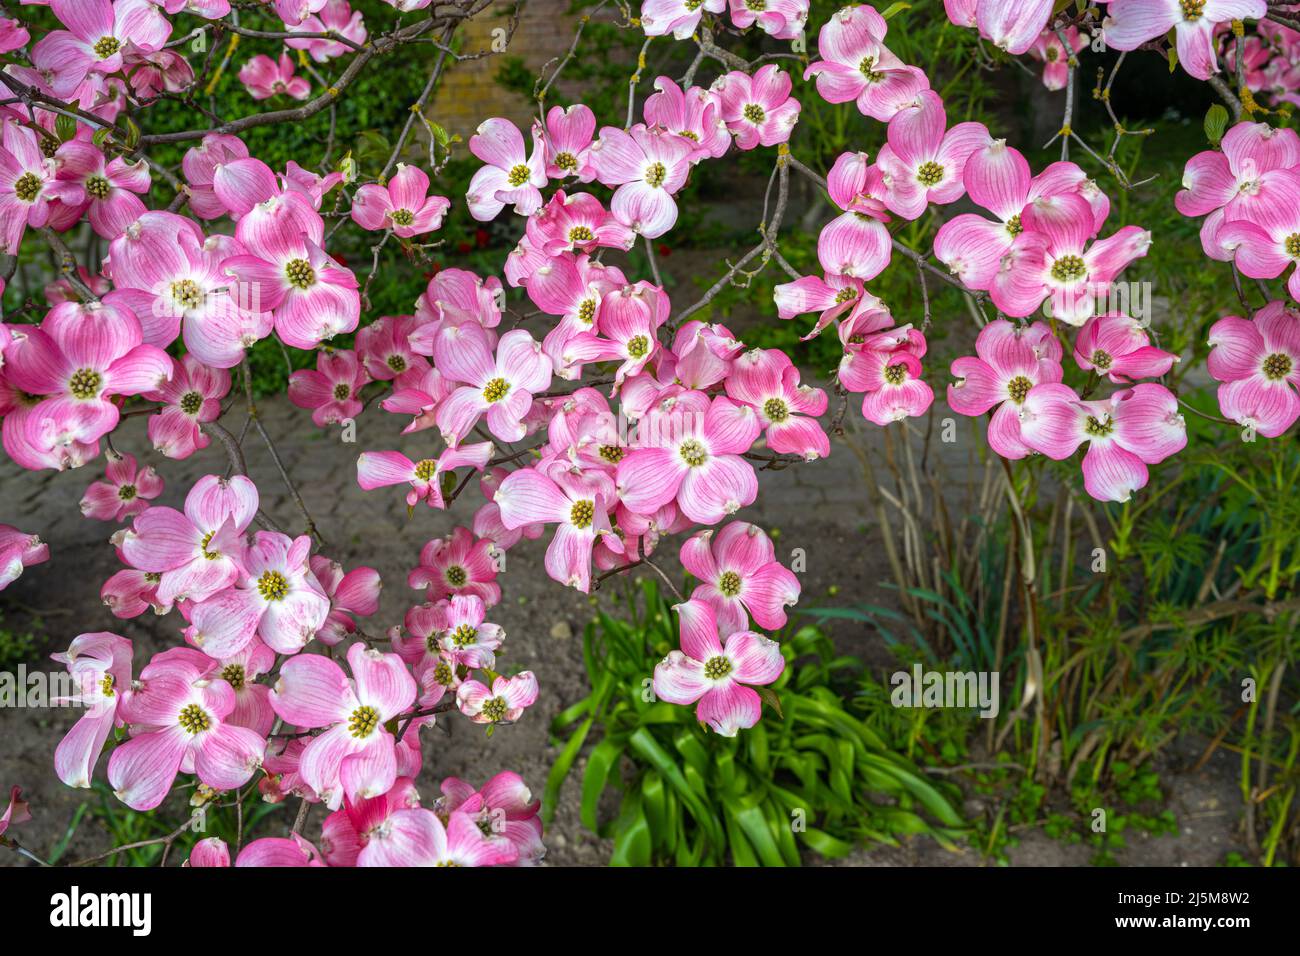 Pink flowers on a dogwood tree in the botanical garden Karlsruhe. Germany, Baden Wuerttemberg, Europe Stock Photo